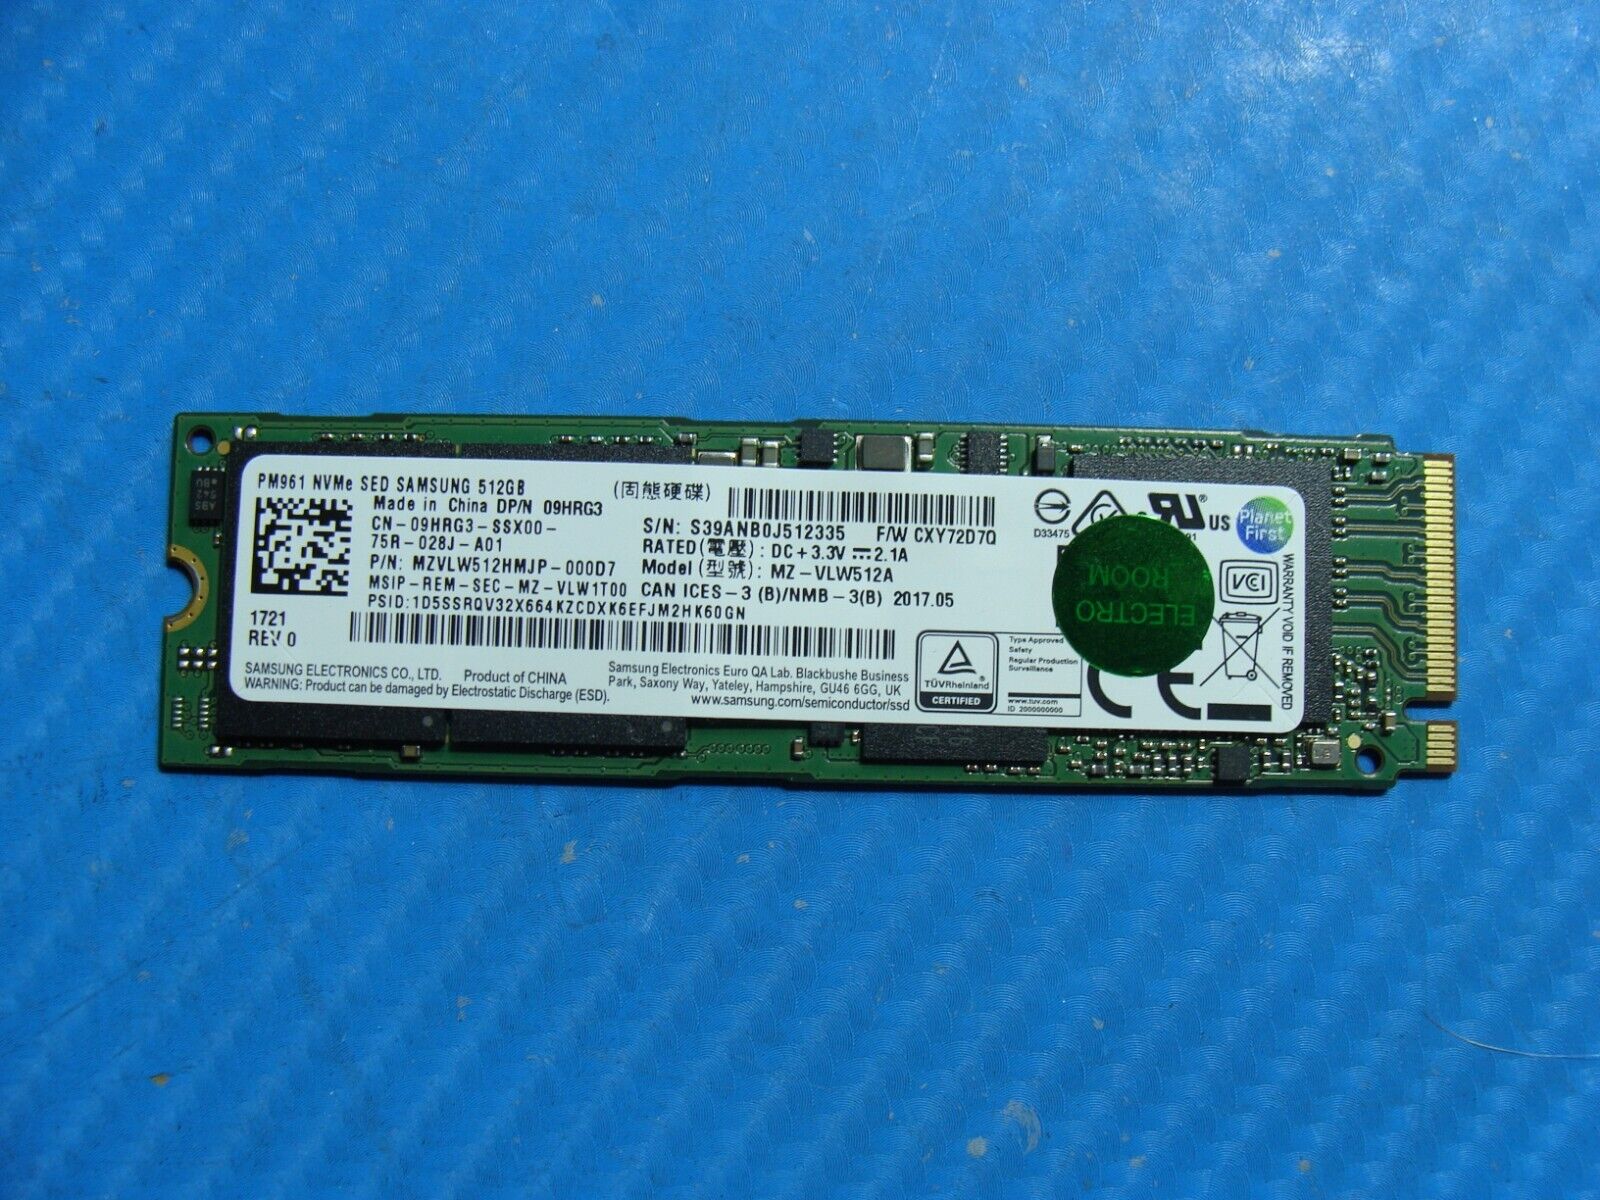 Dell 7490 Samsung 512GB M.2 NVMe SSD Solid State Drive MZVLW512HMJP-000D7 9HRG3